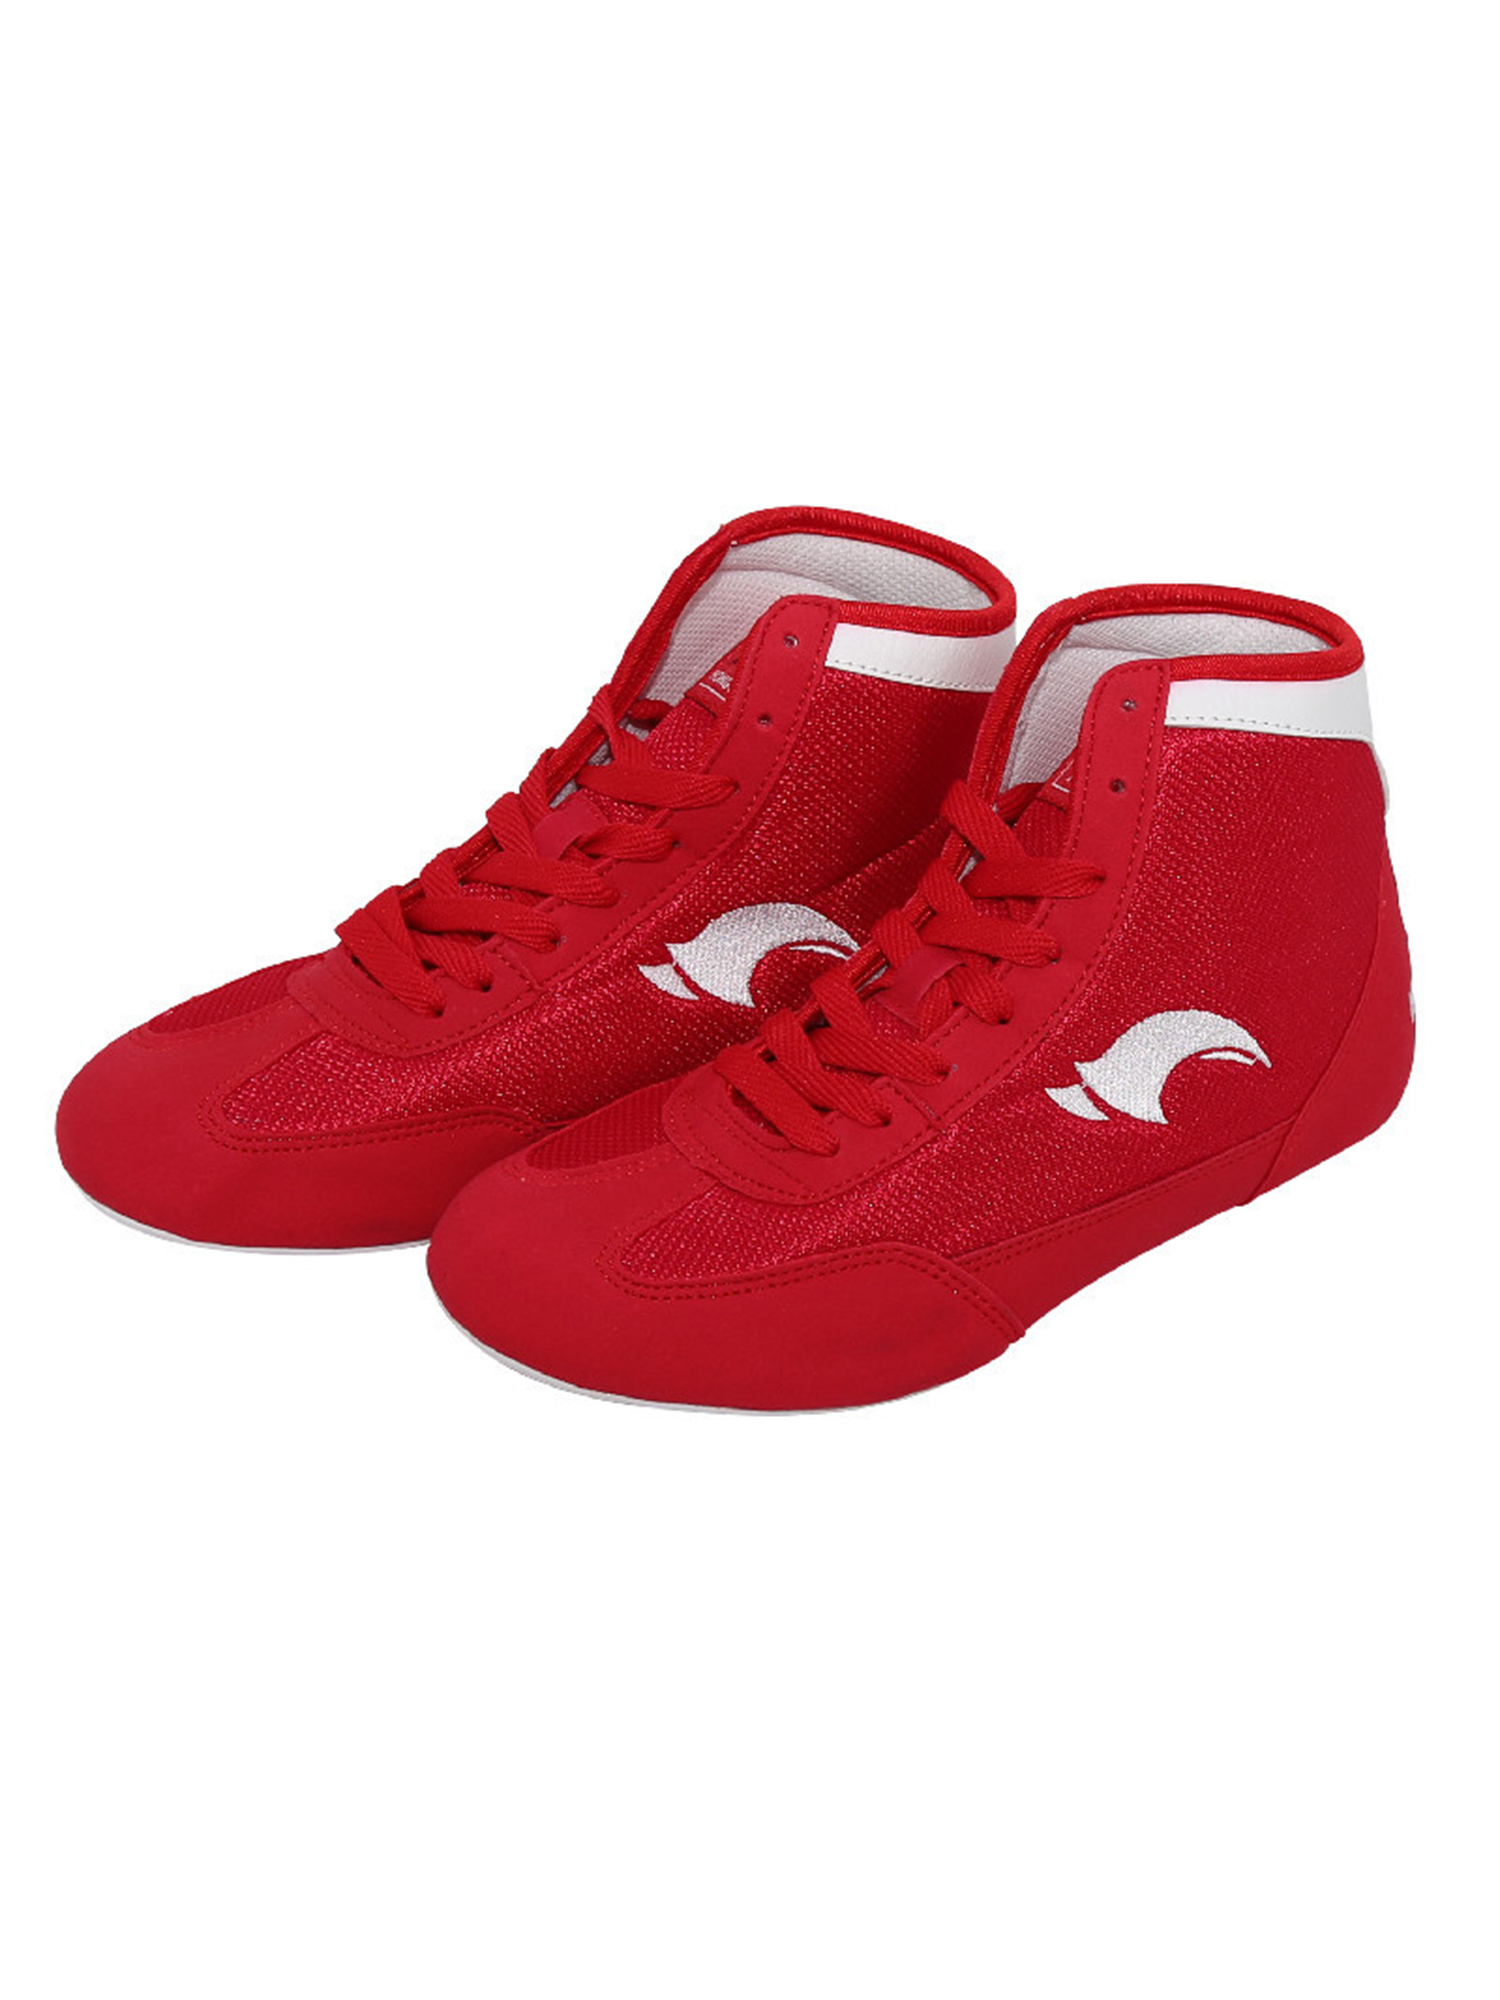 Eloshman Boxing Shoes for Men Boys Comfort Sports Round Toe Combat Sneakers Gym Breathable Wide WidthWrestling Shoes Red-1 2Y - image 1 of 4